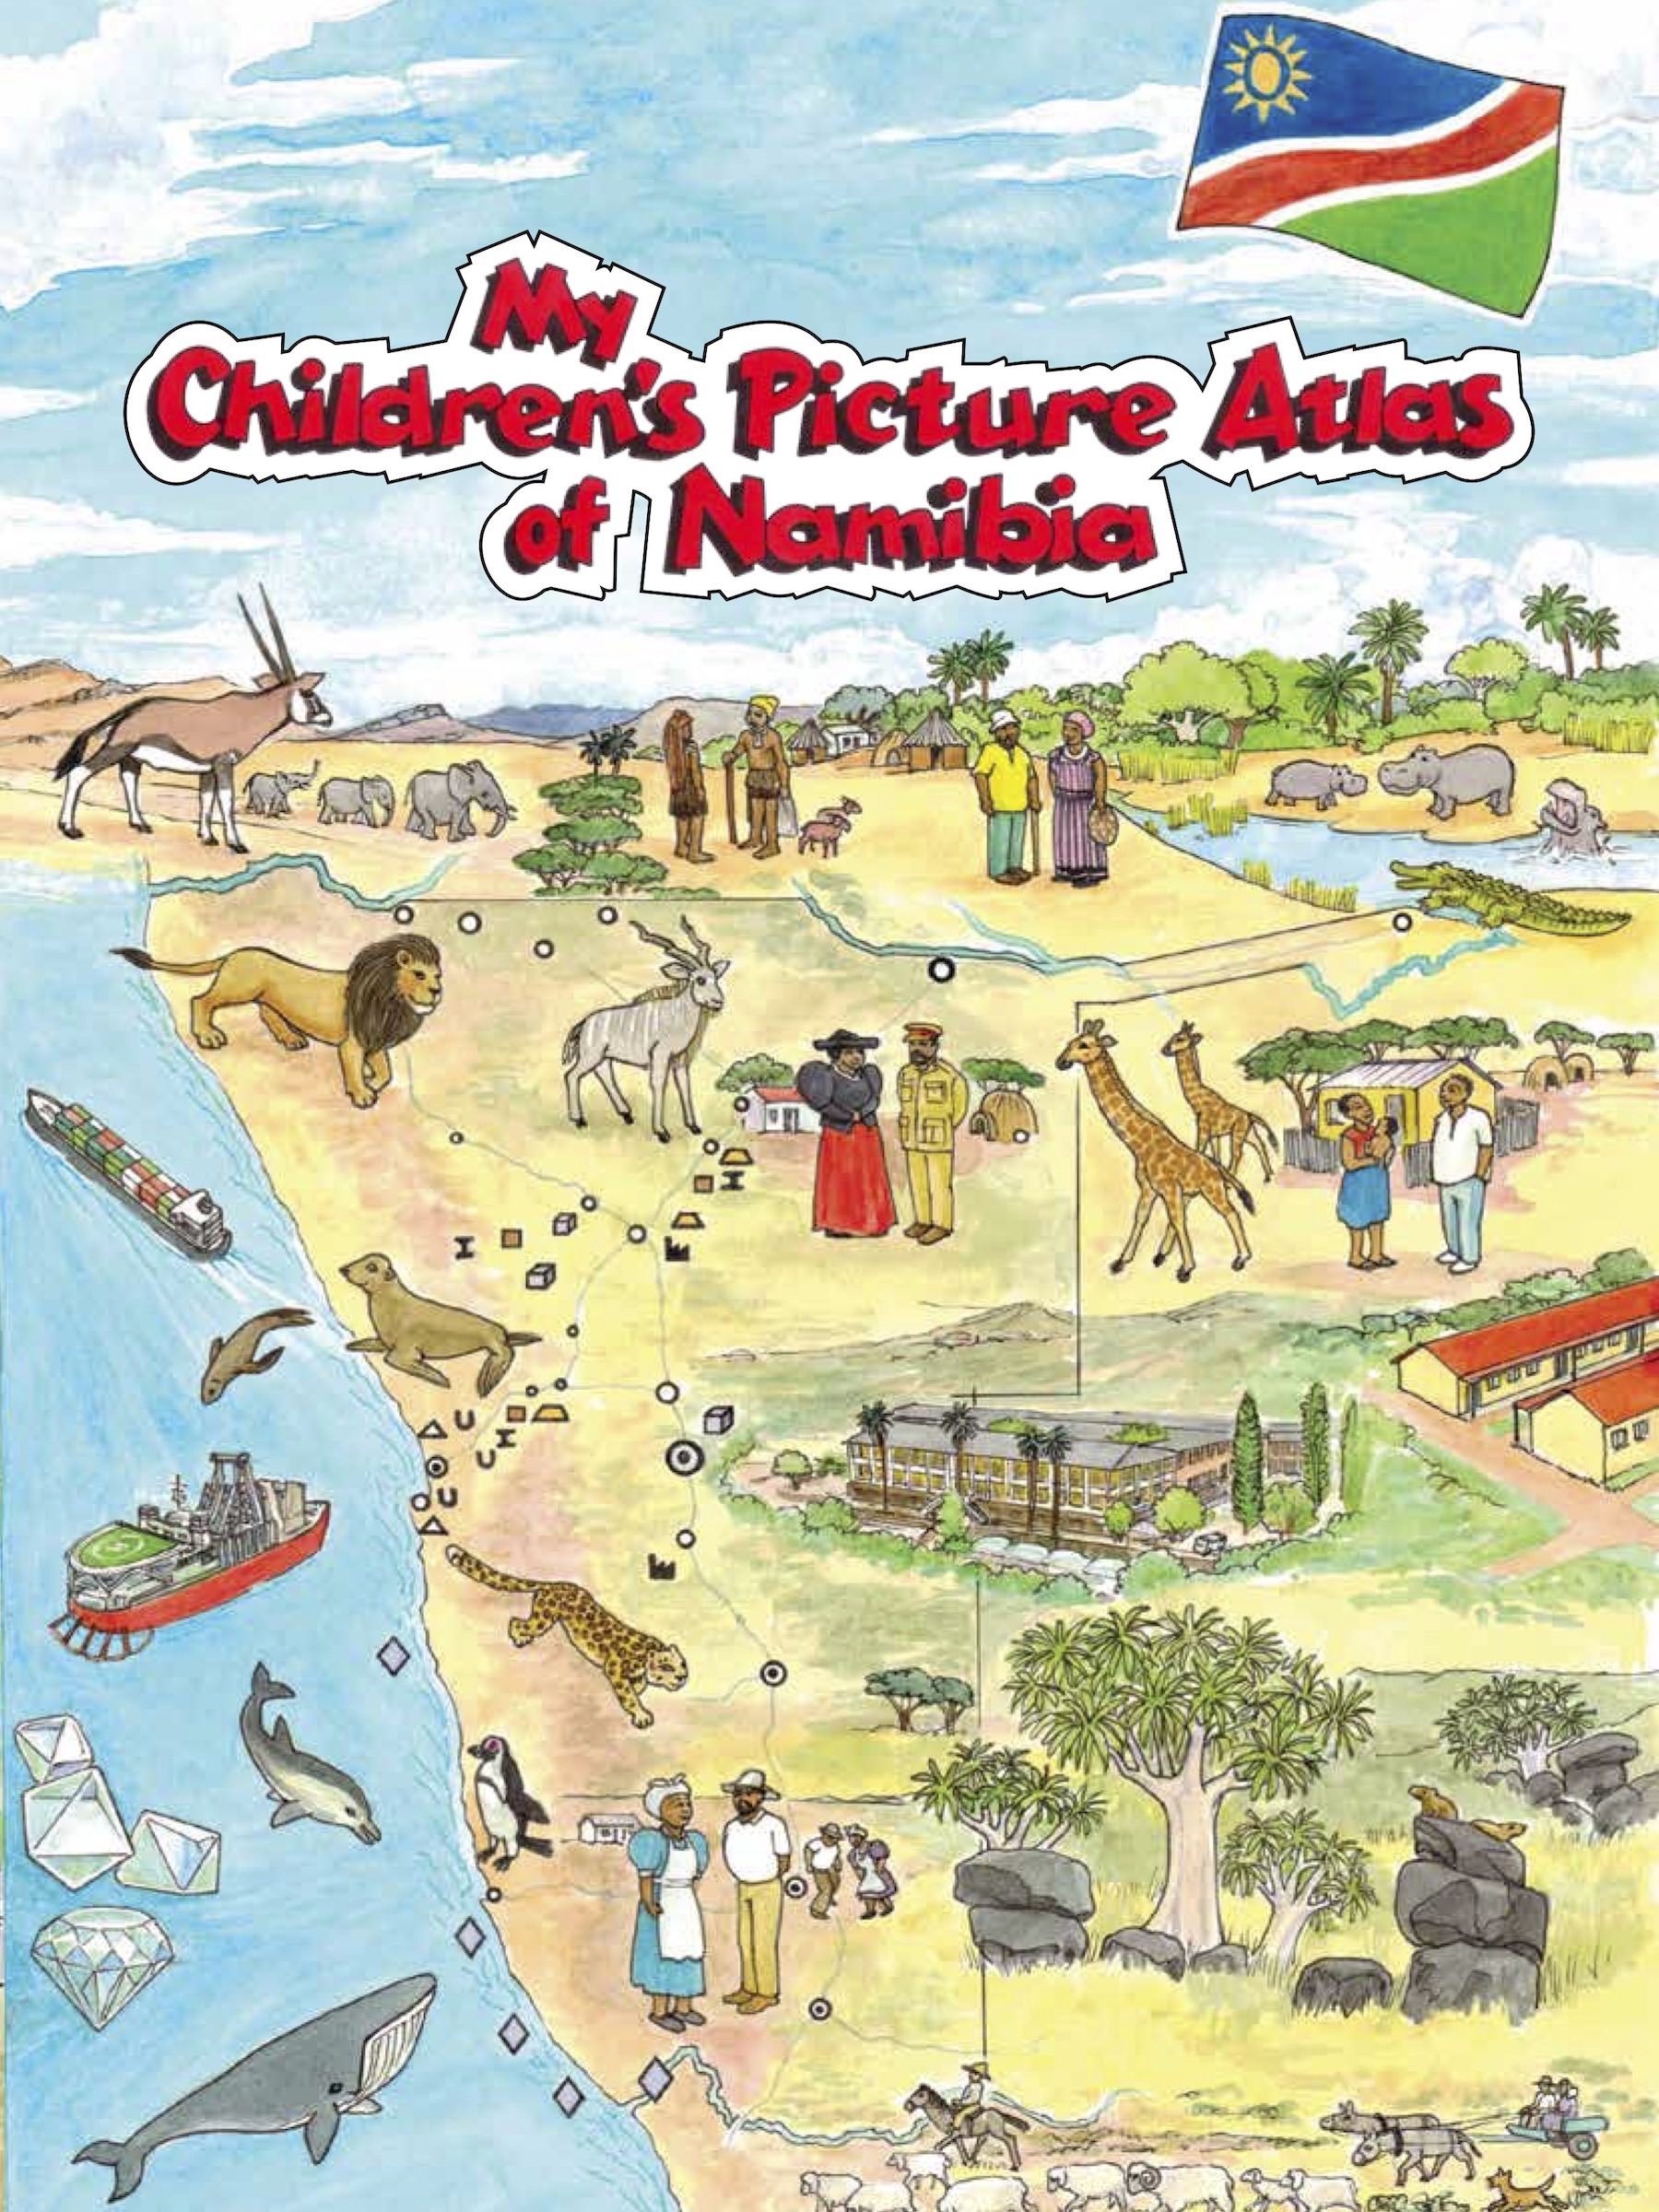 The front cover of the Children's Atlas of Namibia.